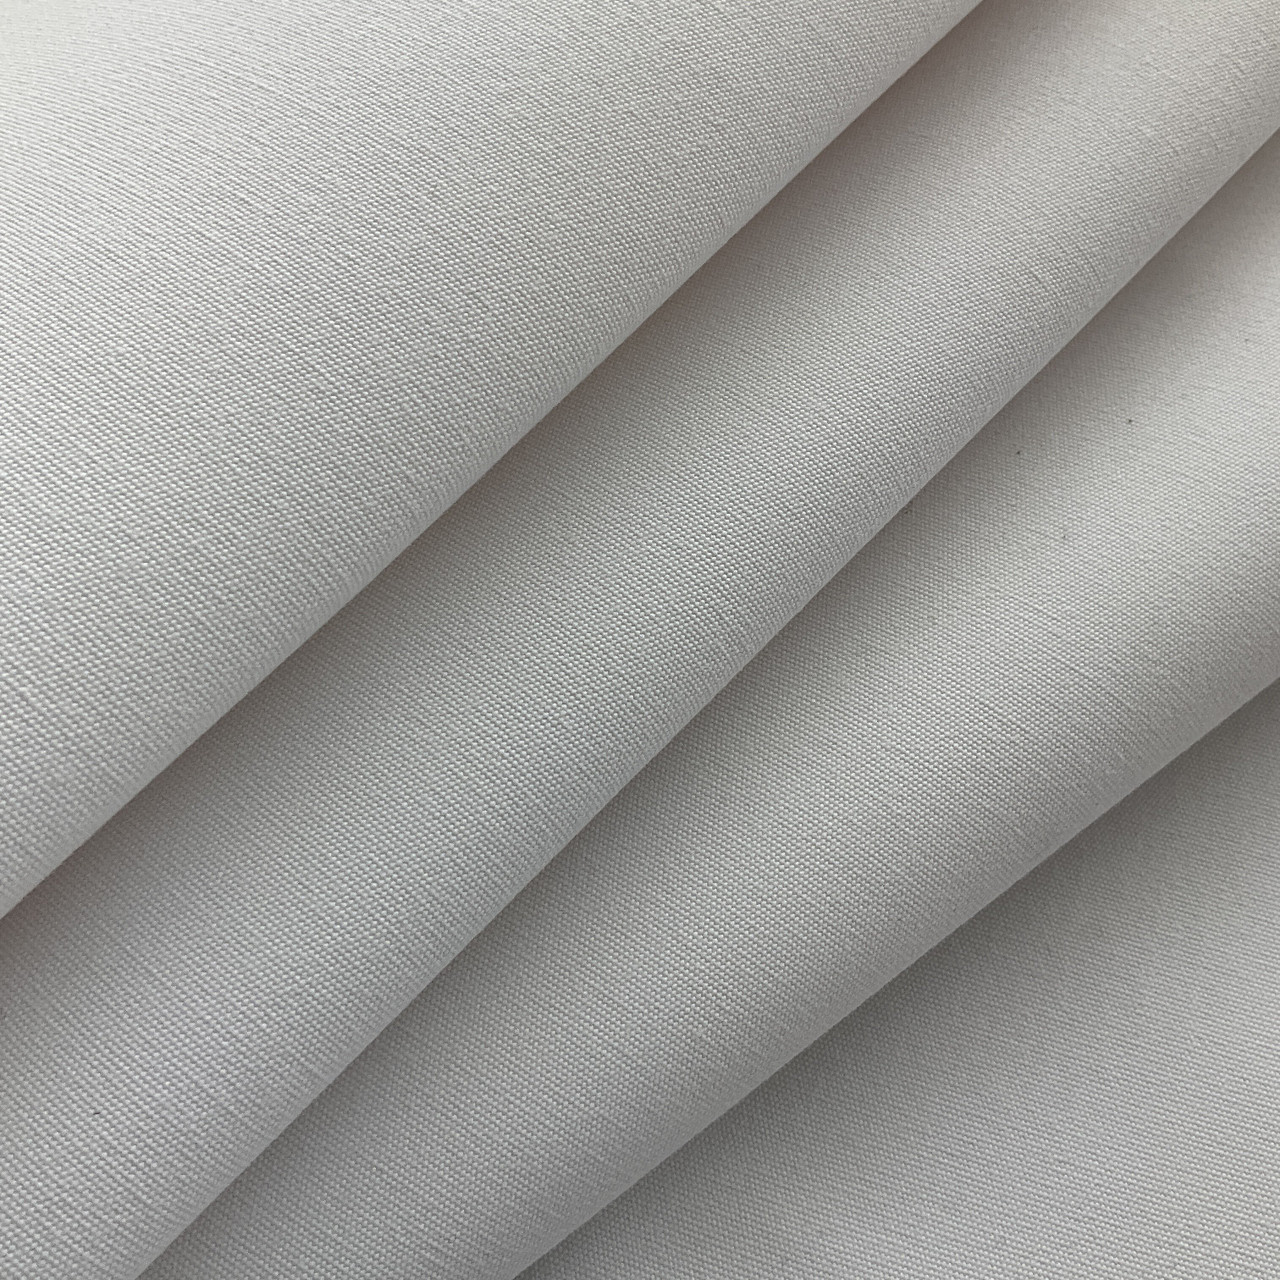  White 100% Cotton Twill Fabric by The Yard(36 Inch) -4.5oz 60  Wide : Arts, Crafts & Sewing